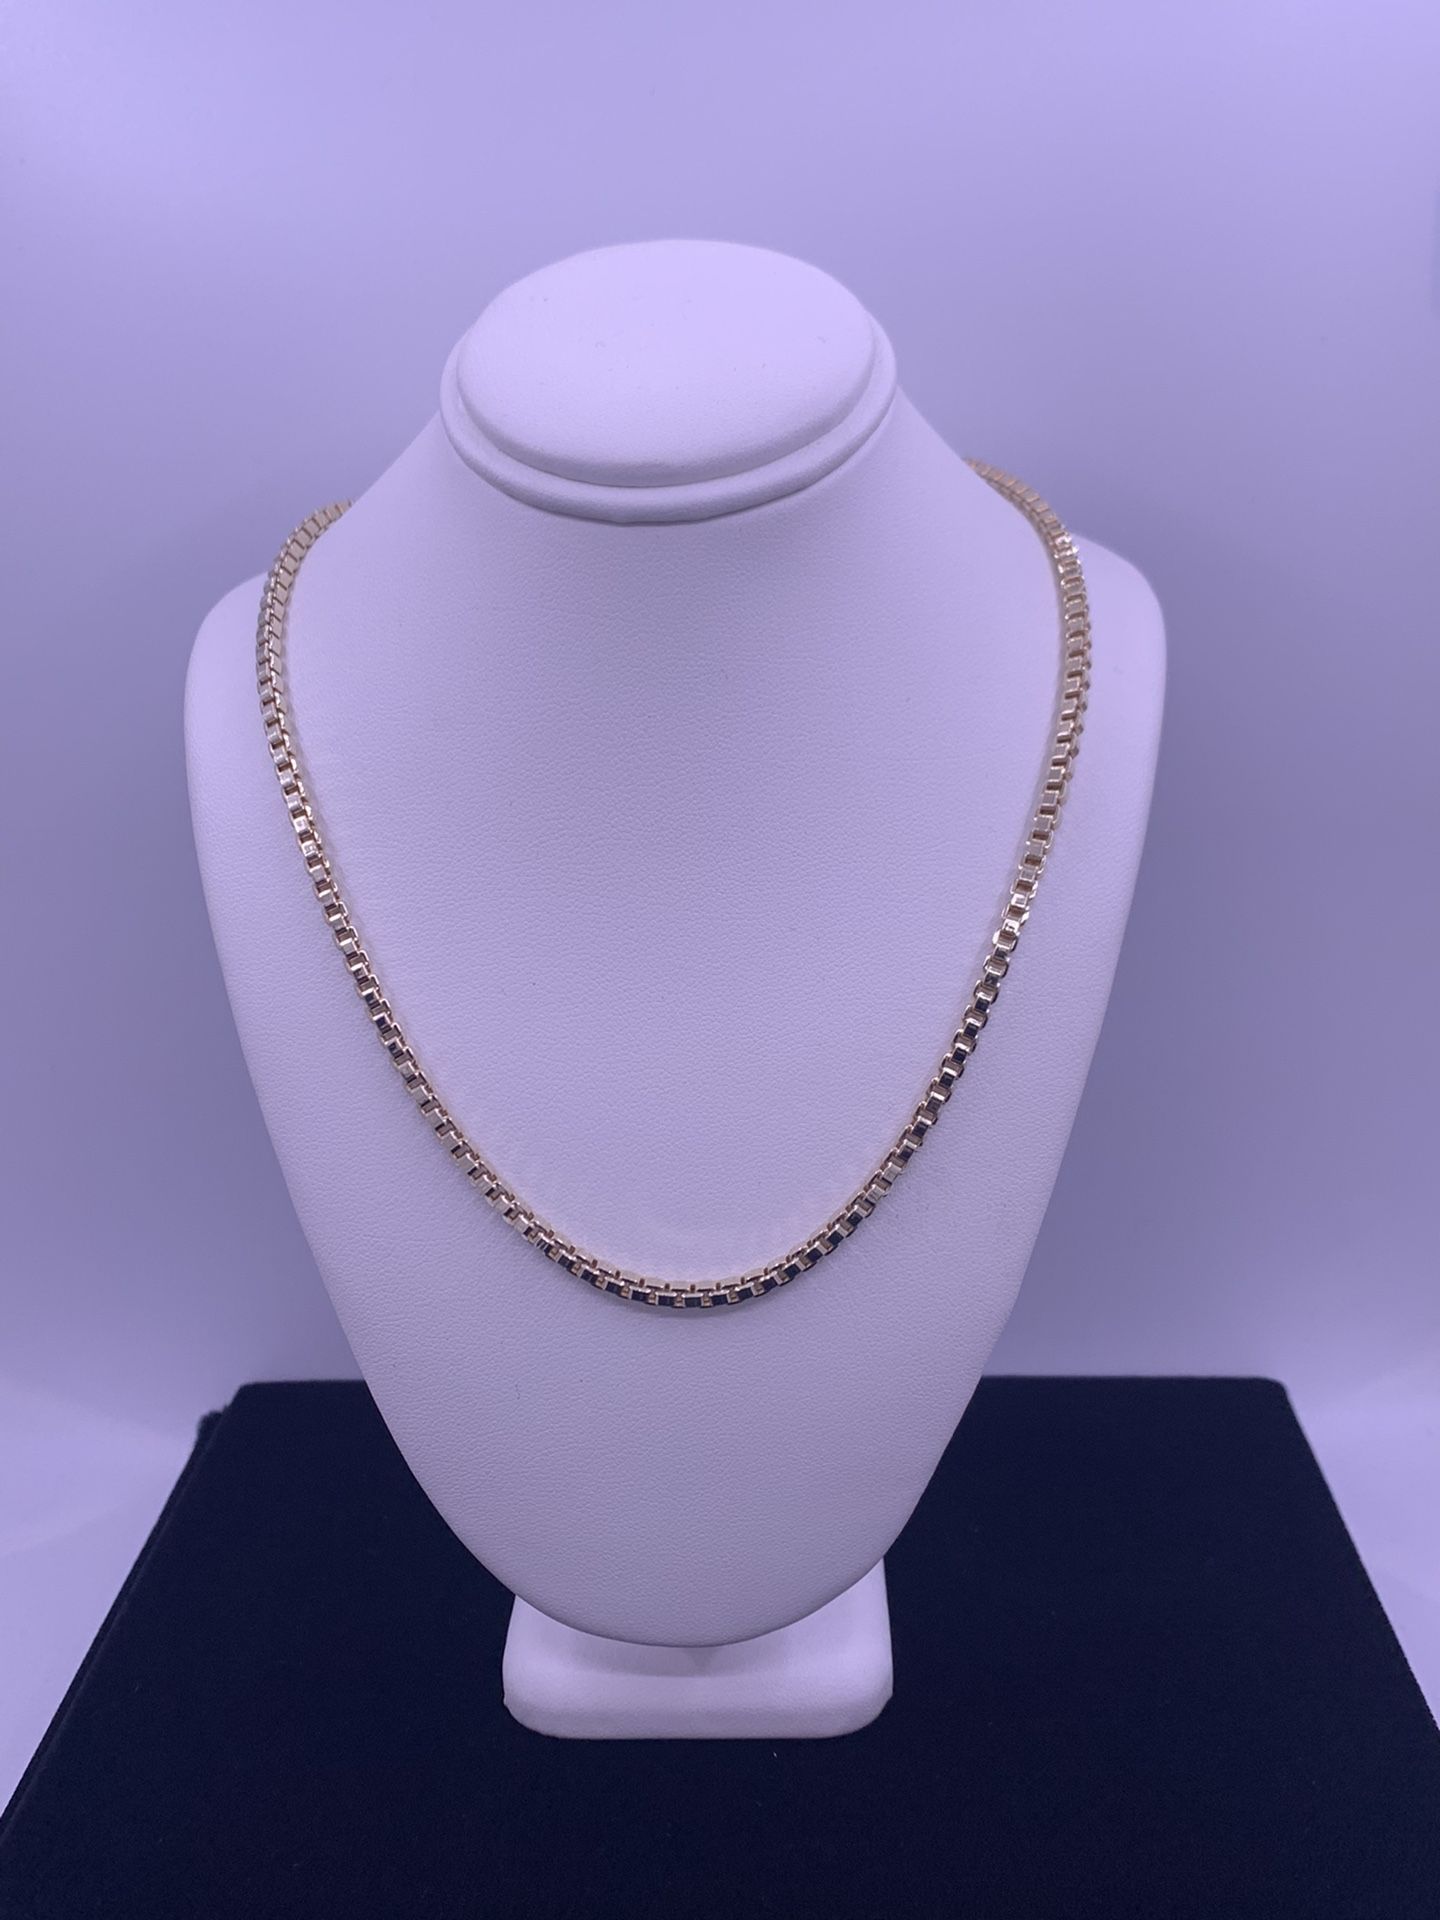 Gold Box Link Chain 5.8g 14kt 16”